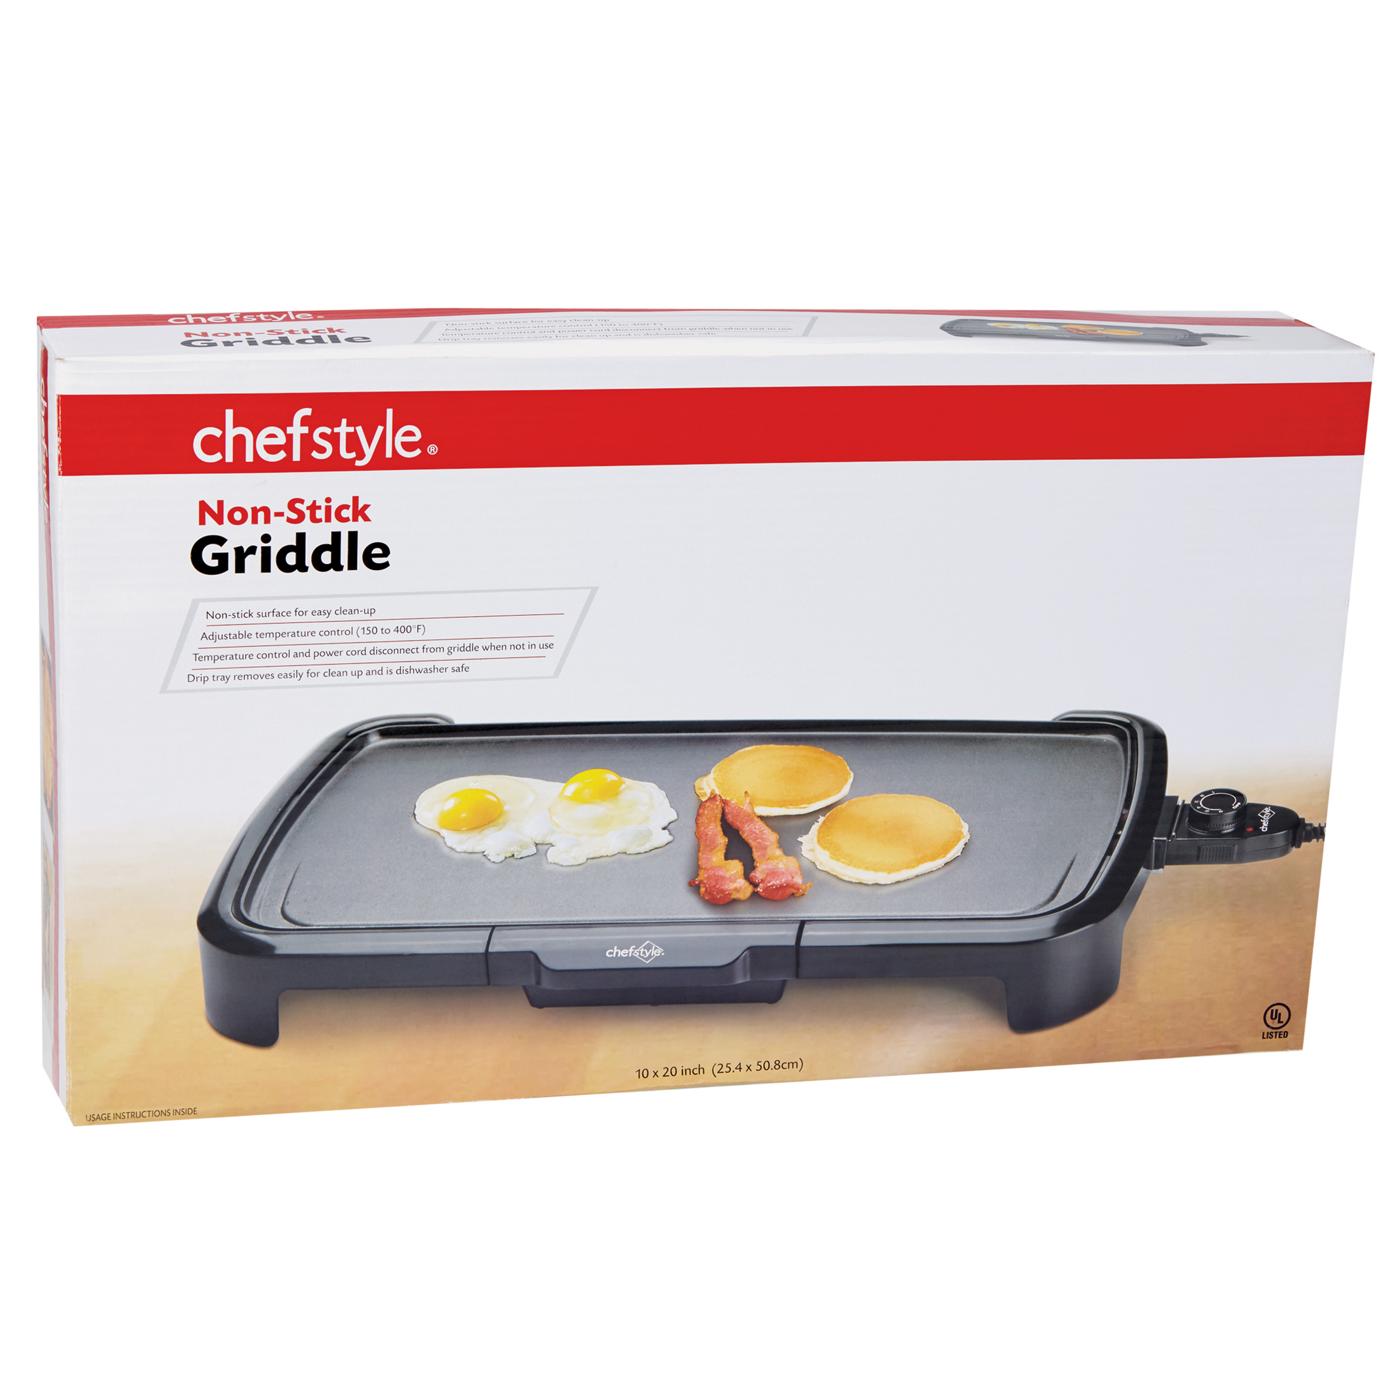 chefstyle Non-Stick Black Griddle; image 2 of 2